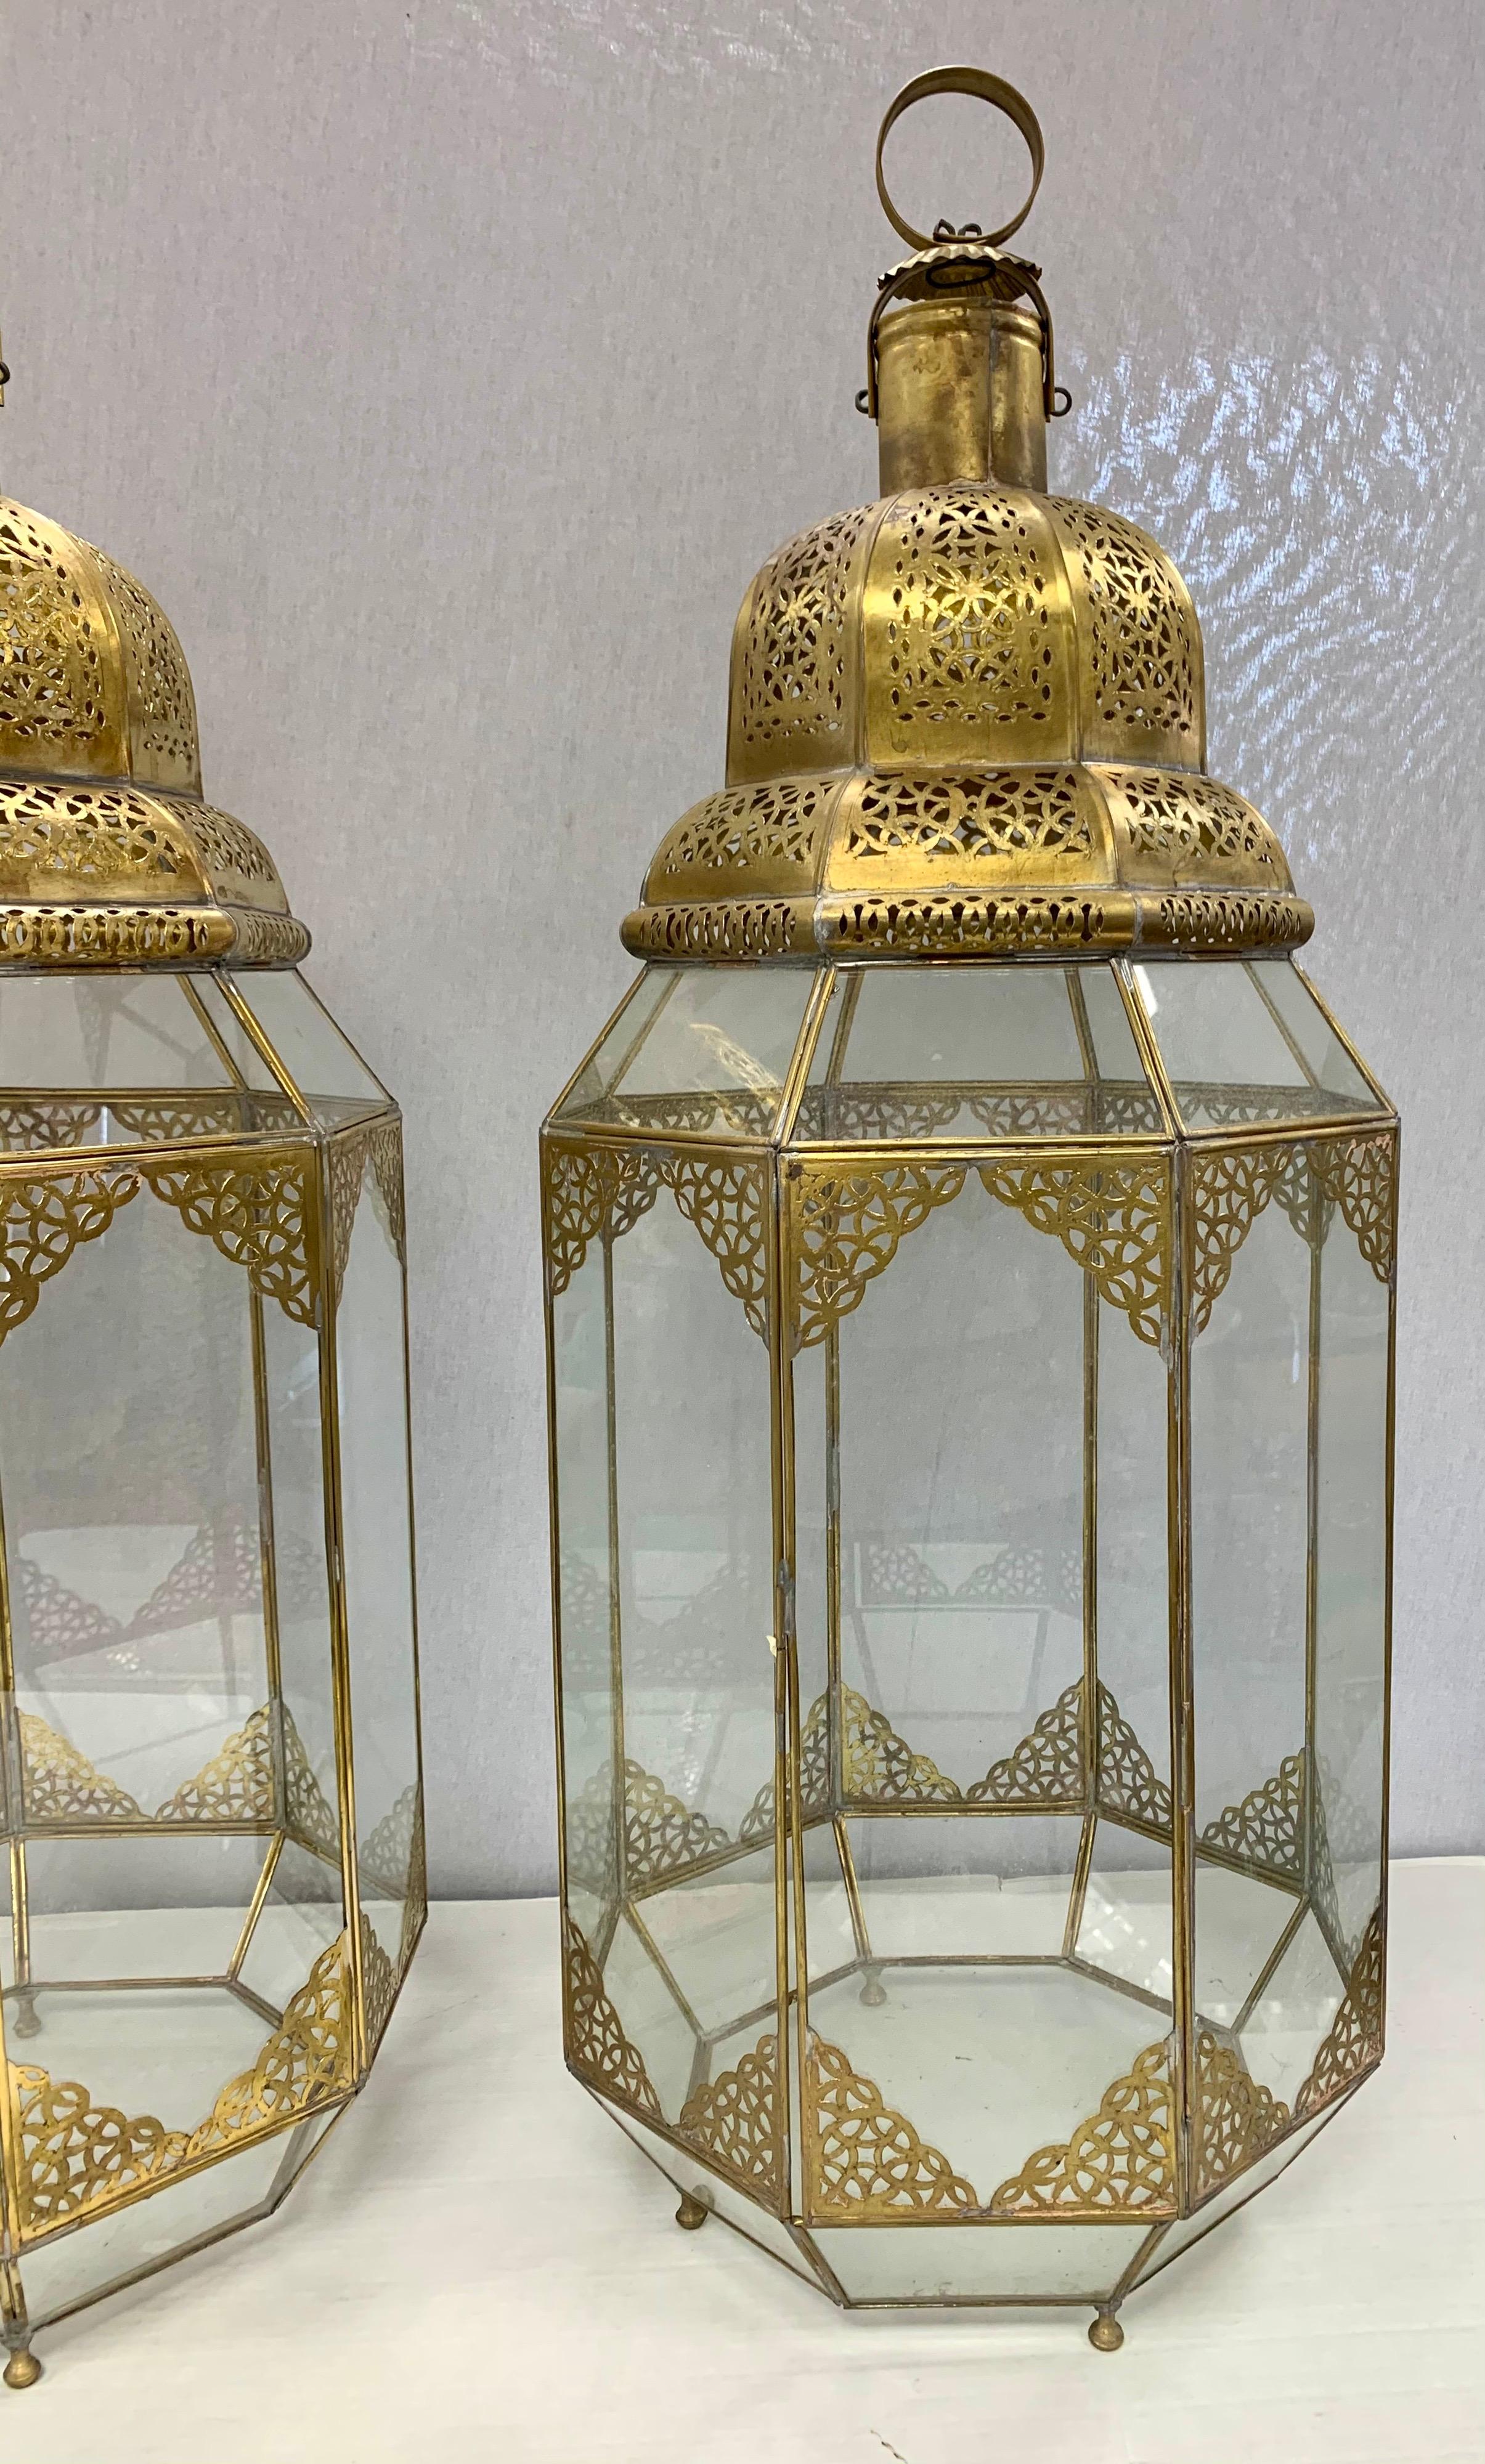 20th Century Large Moroccan Handcrafted Pierced Brass and Glass Lanterns Hurricanes Set of 3